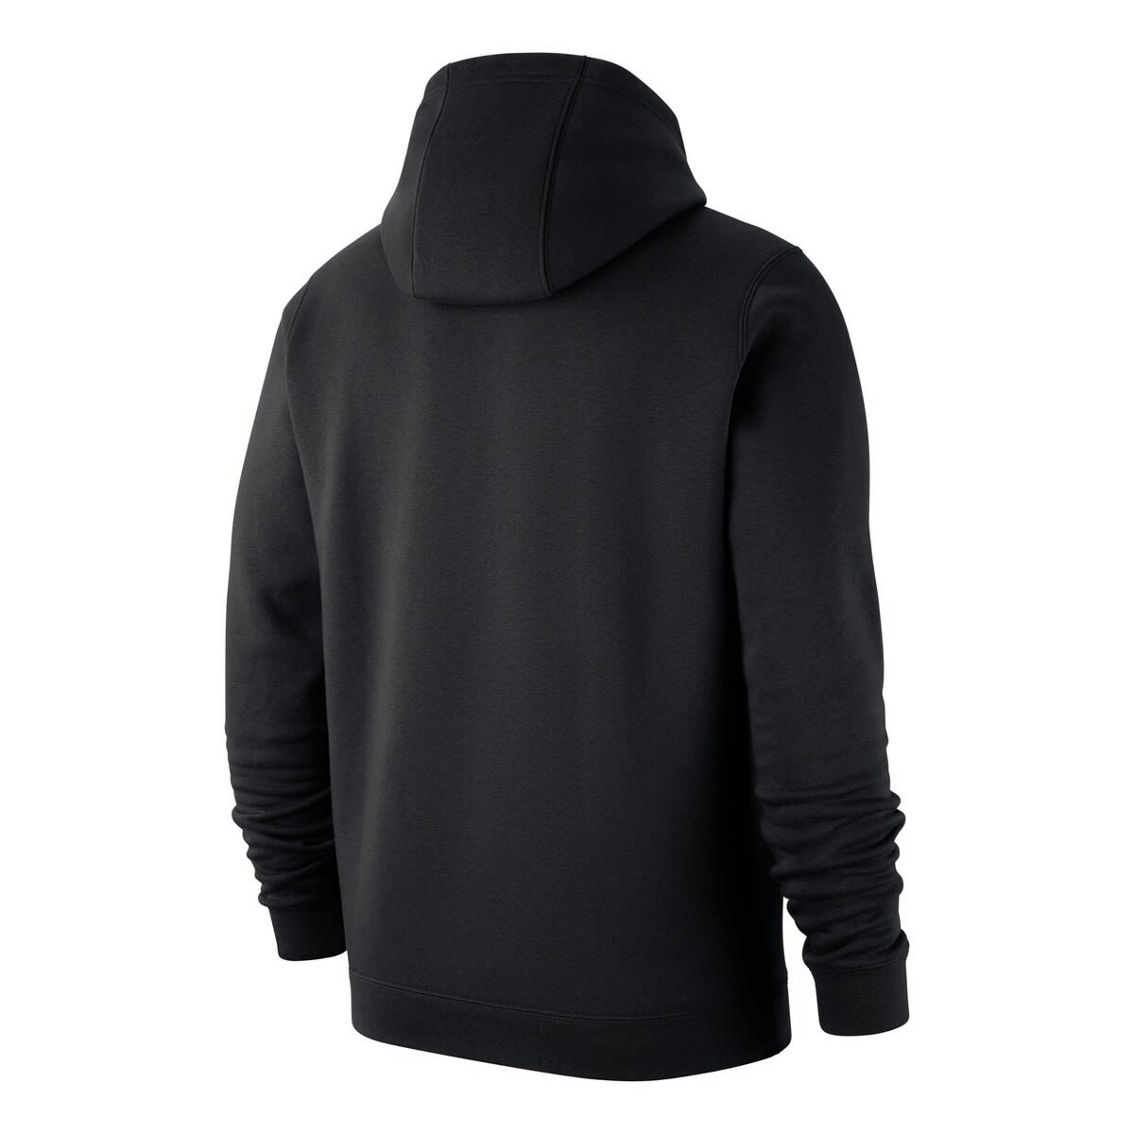 Men's Nike Black Army Black Knights Rivalry Courtesy Of Fleece Pullover Hoodie - Image 4 of 4